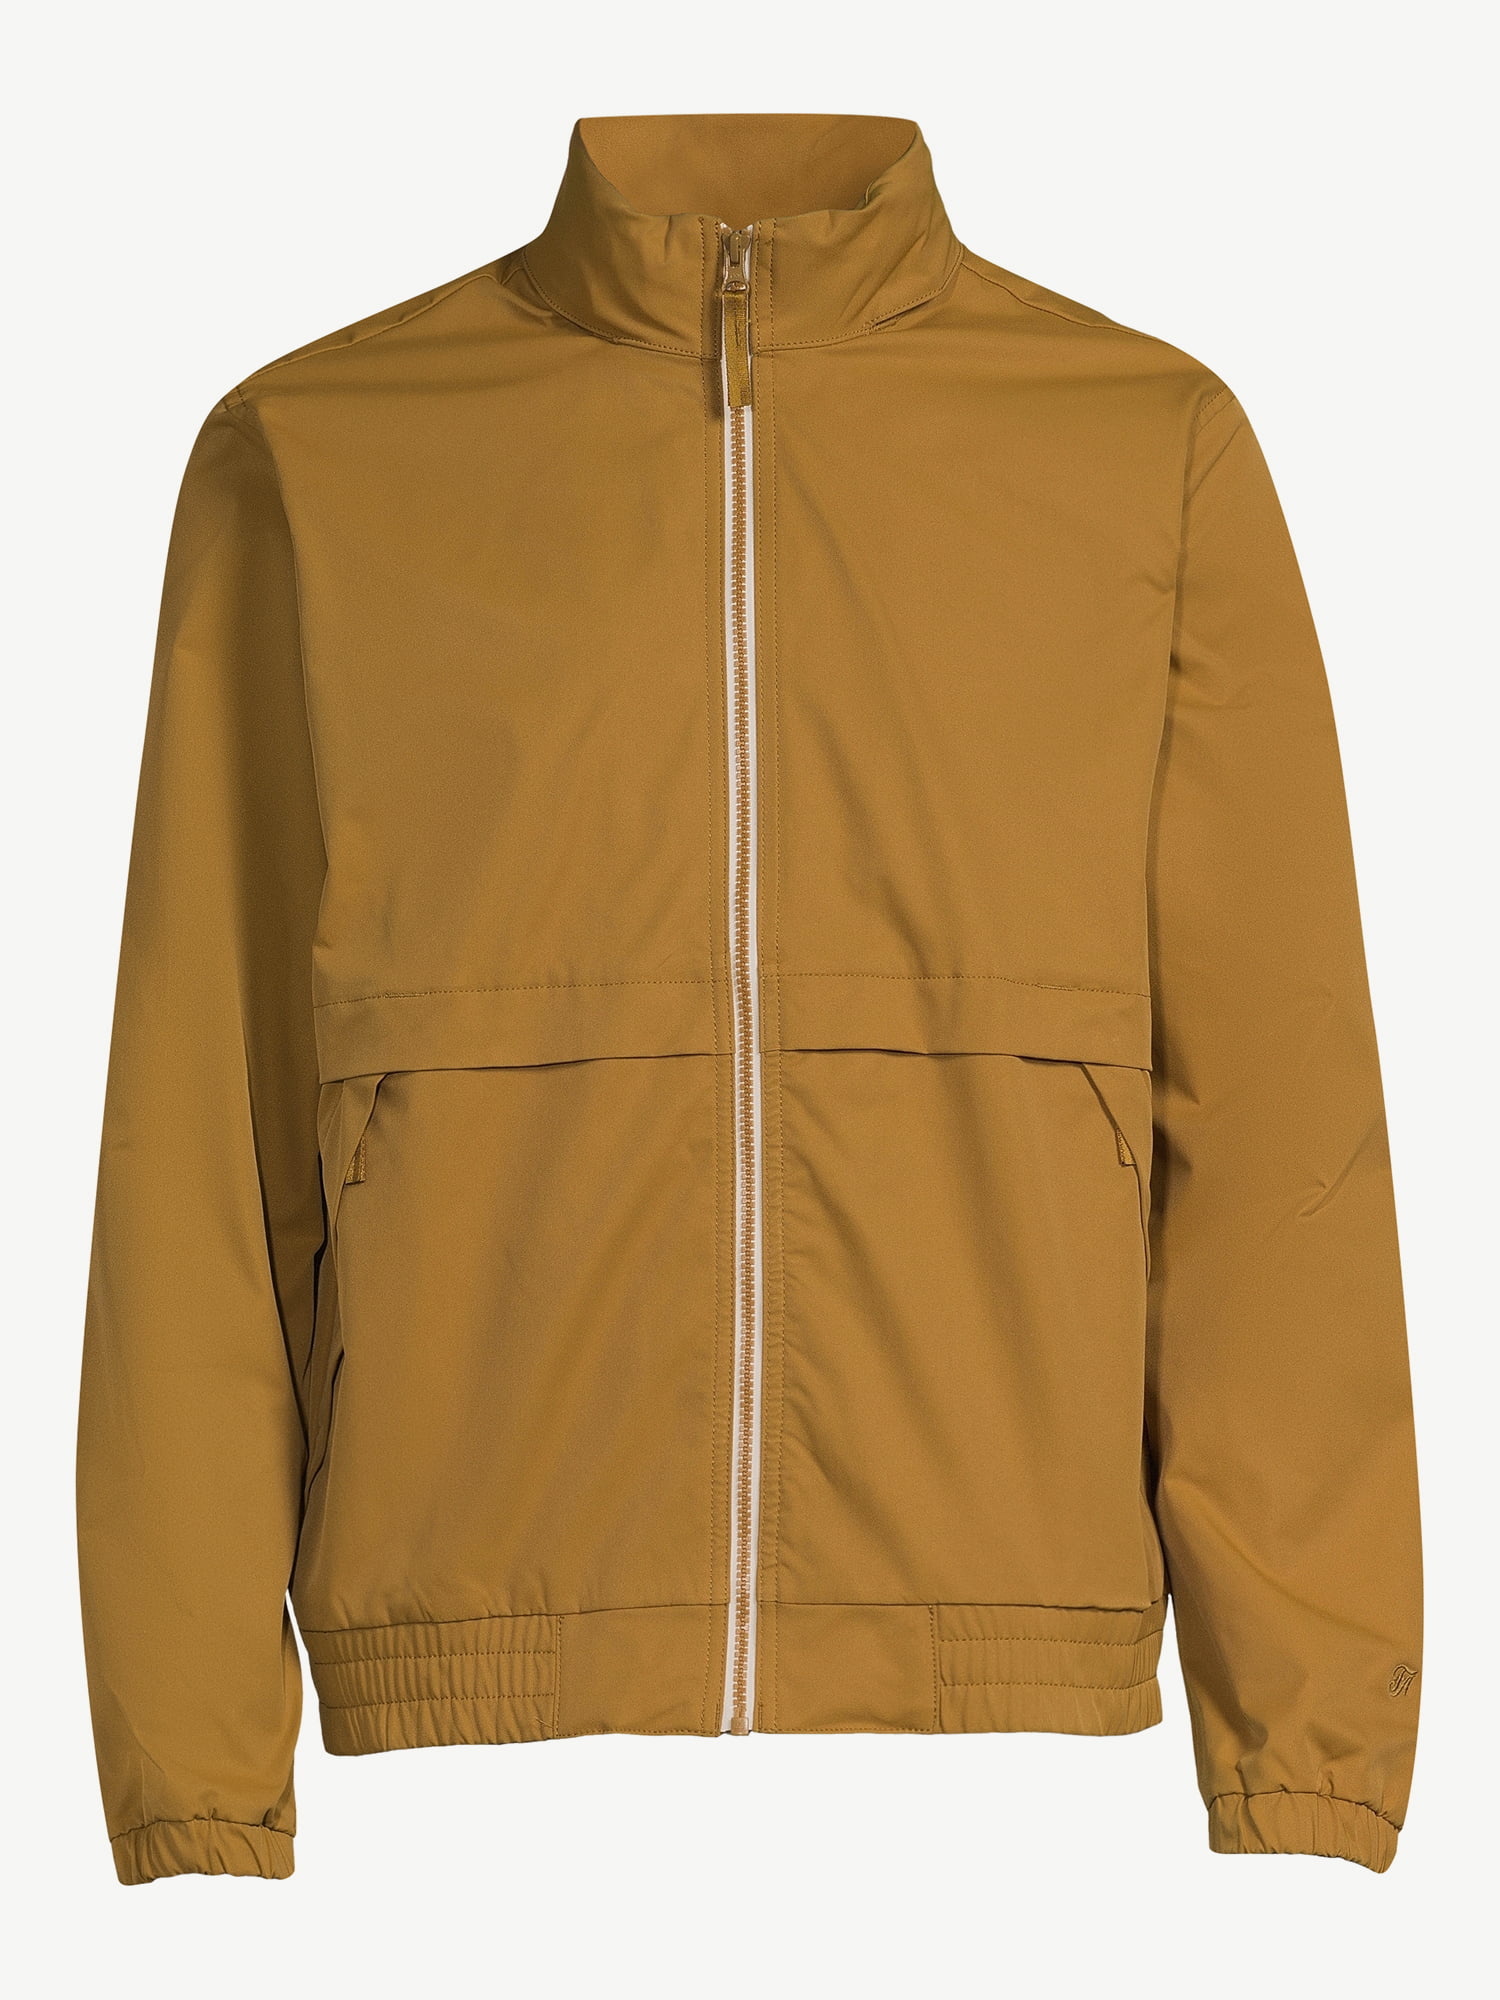 Free Assembly Men's Twill Bomber Jacket with Hidden Hood, Sizes XS-3XL